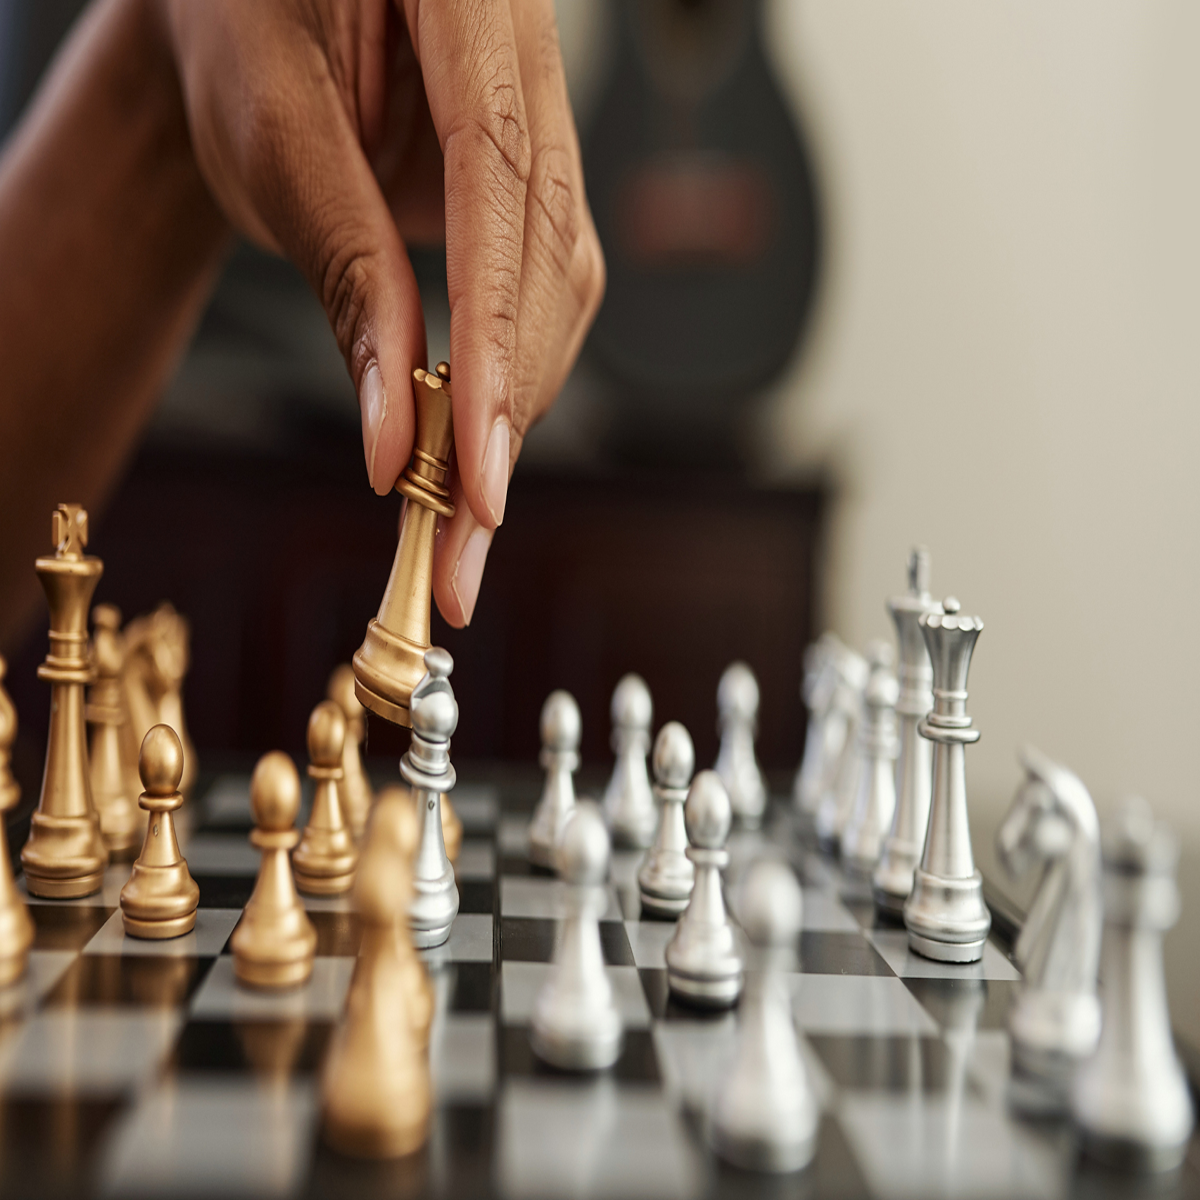 What is Solo Chess? How do I Play? - Chess.com Member Support and FAQs